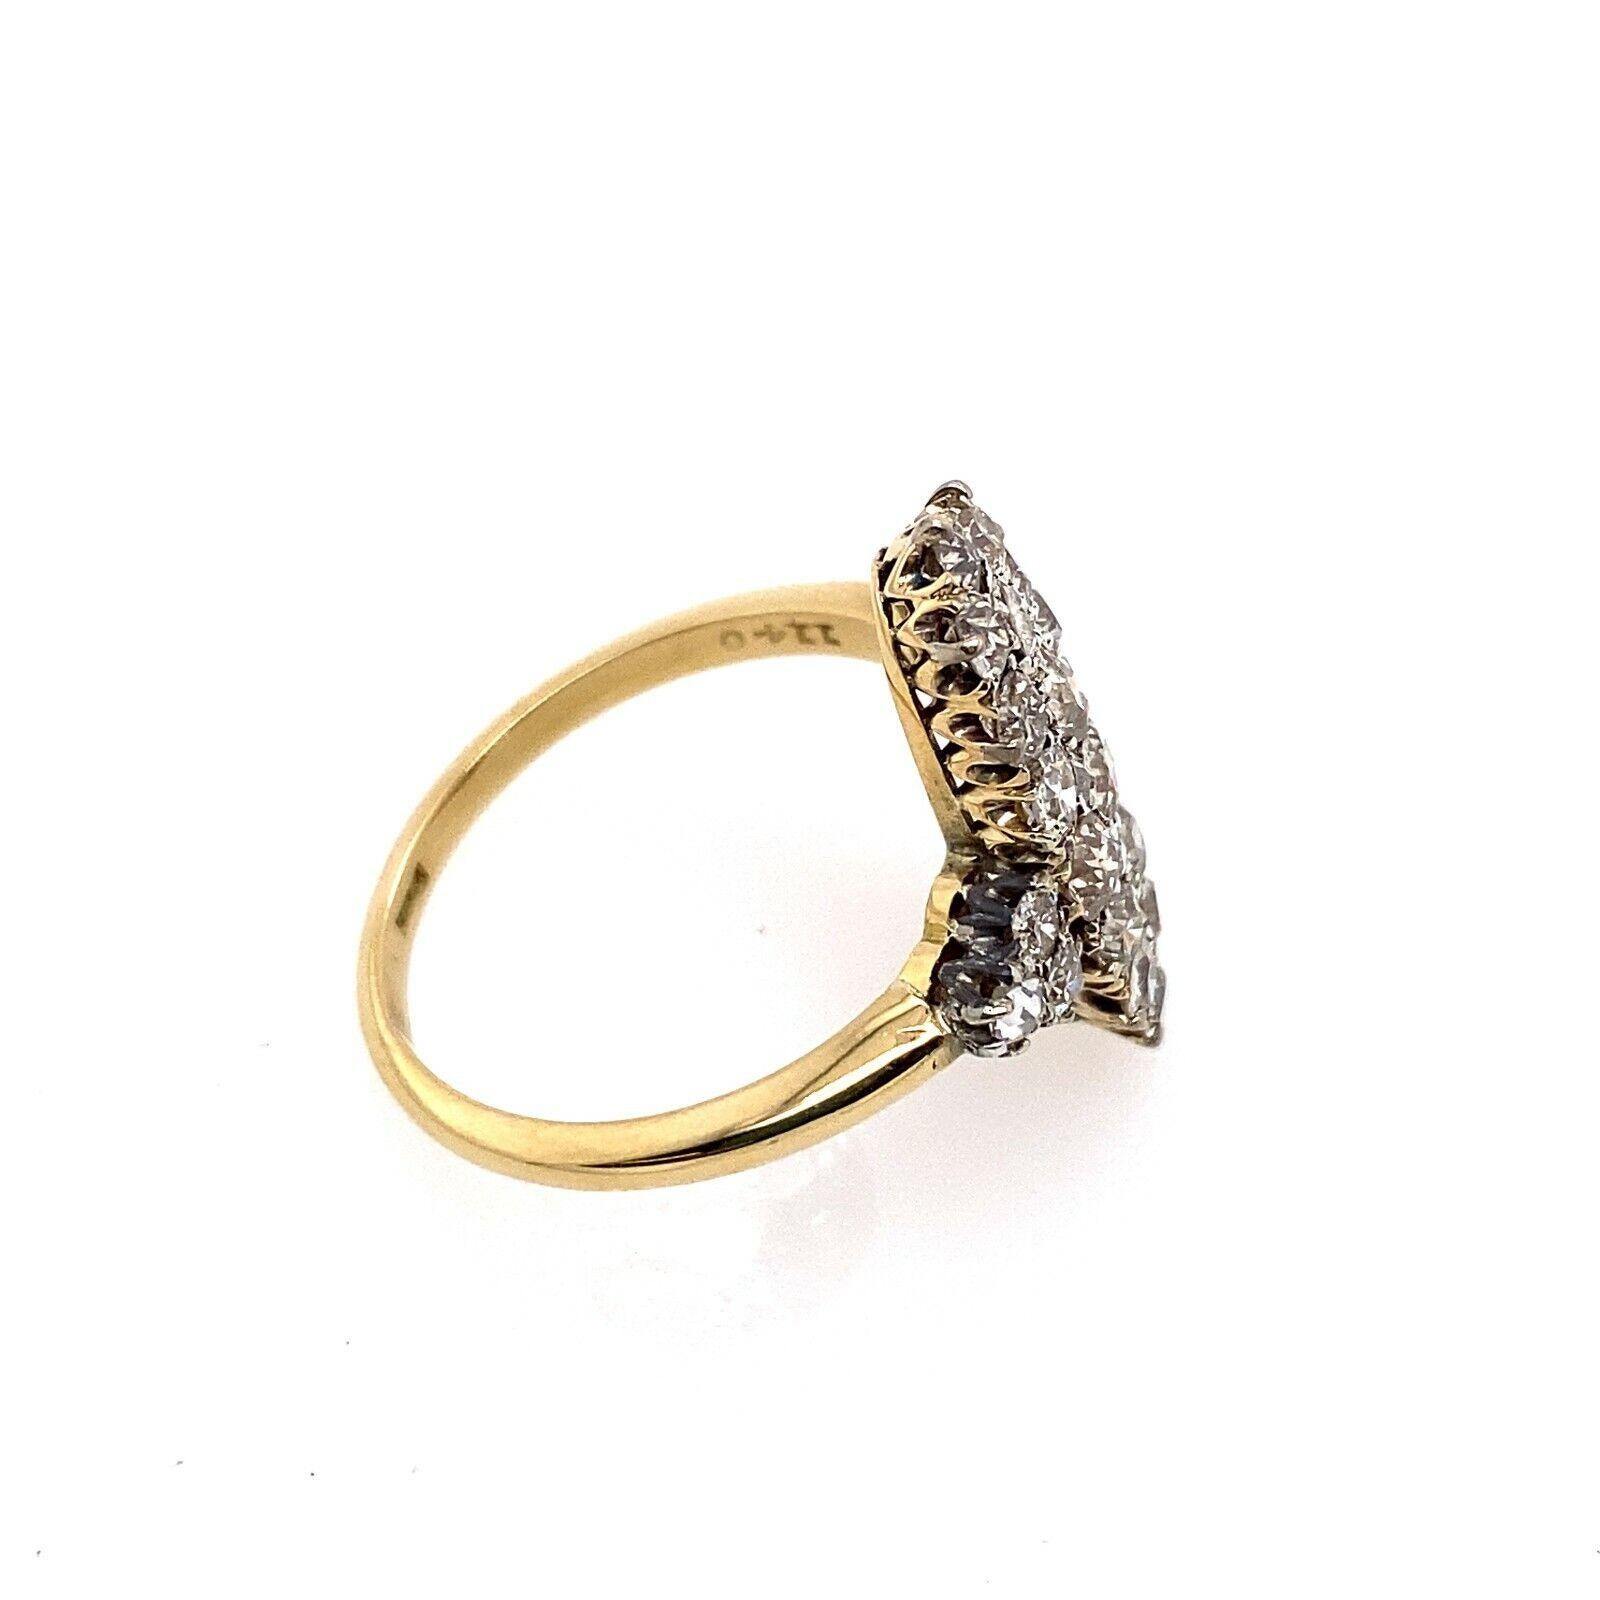 3.0ct Antique Lozenge Shape Victorian Cut Diamond Cluster Ring, Set In 18ct Gold

This beautiful Victorian cut Diamond Cluster Ring is set 3.0ct antique diamonds. The cluster is set in a matching 18ct yellow and white gold. The antique diamond is a